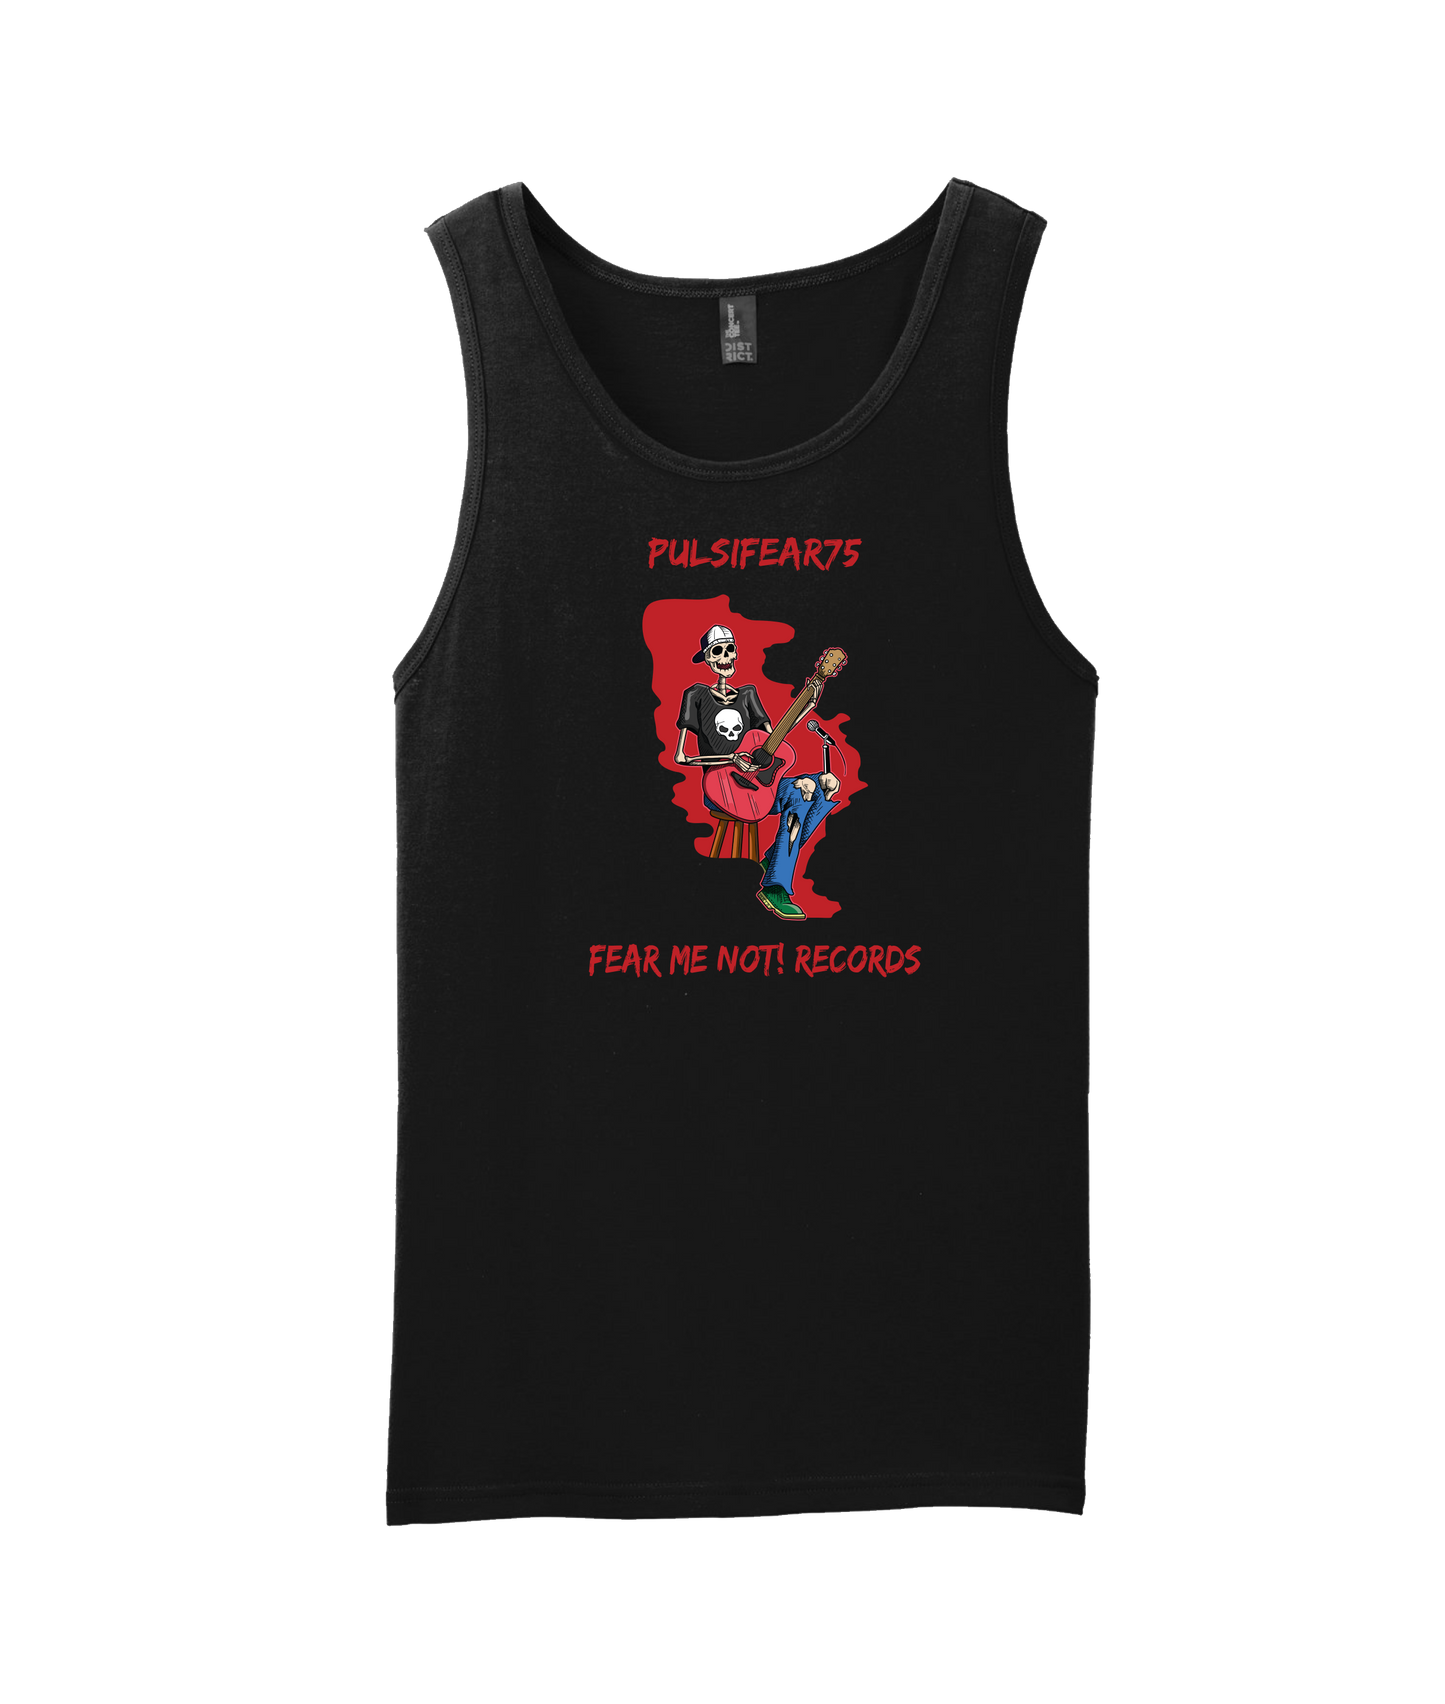 Mark Pulsipher Official - Fear Me Not! Records - Black Tank Top